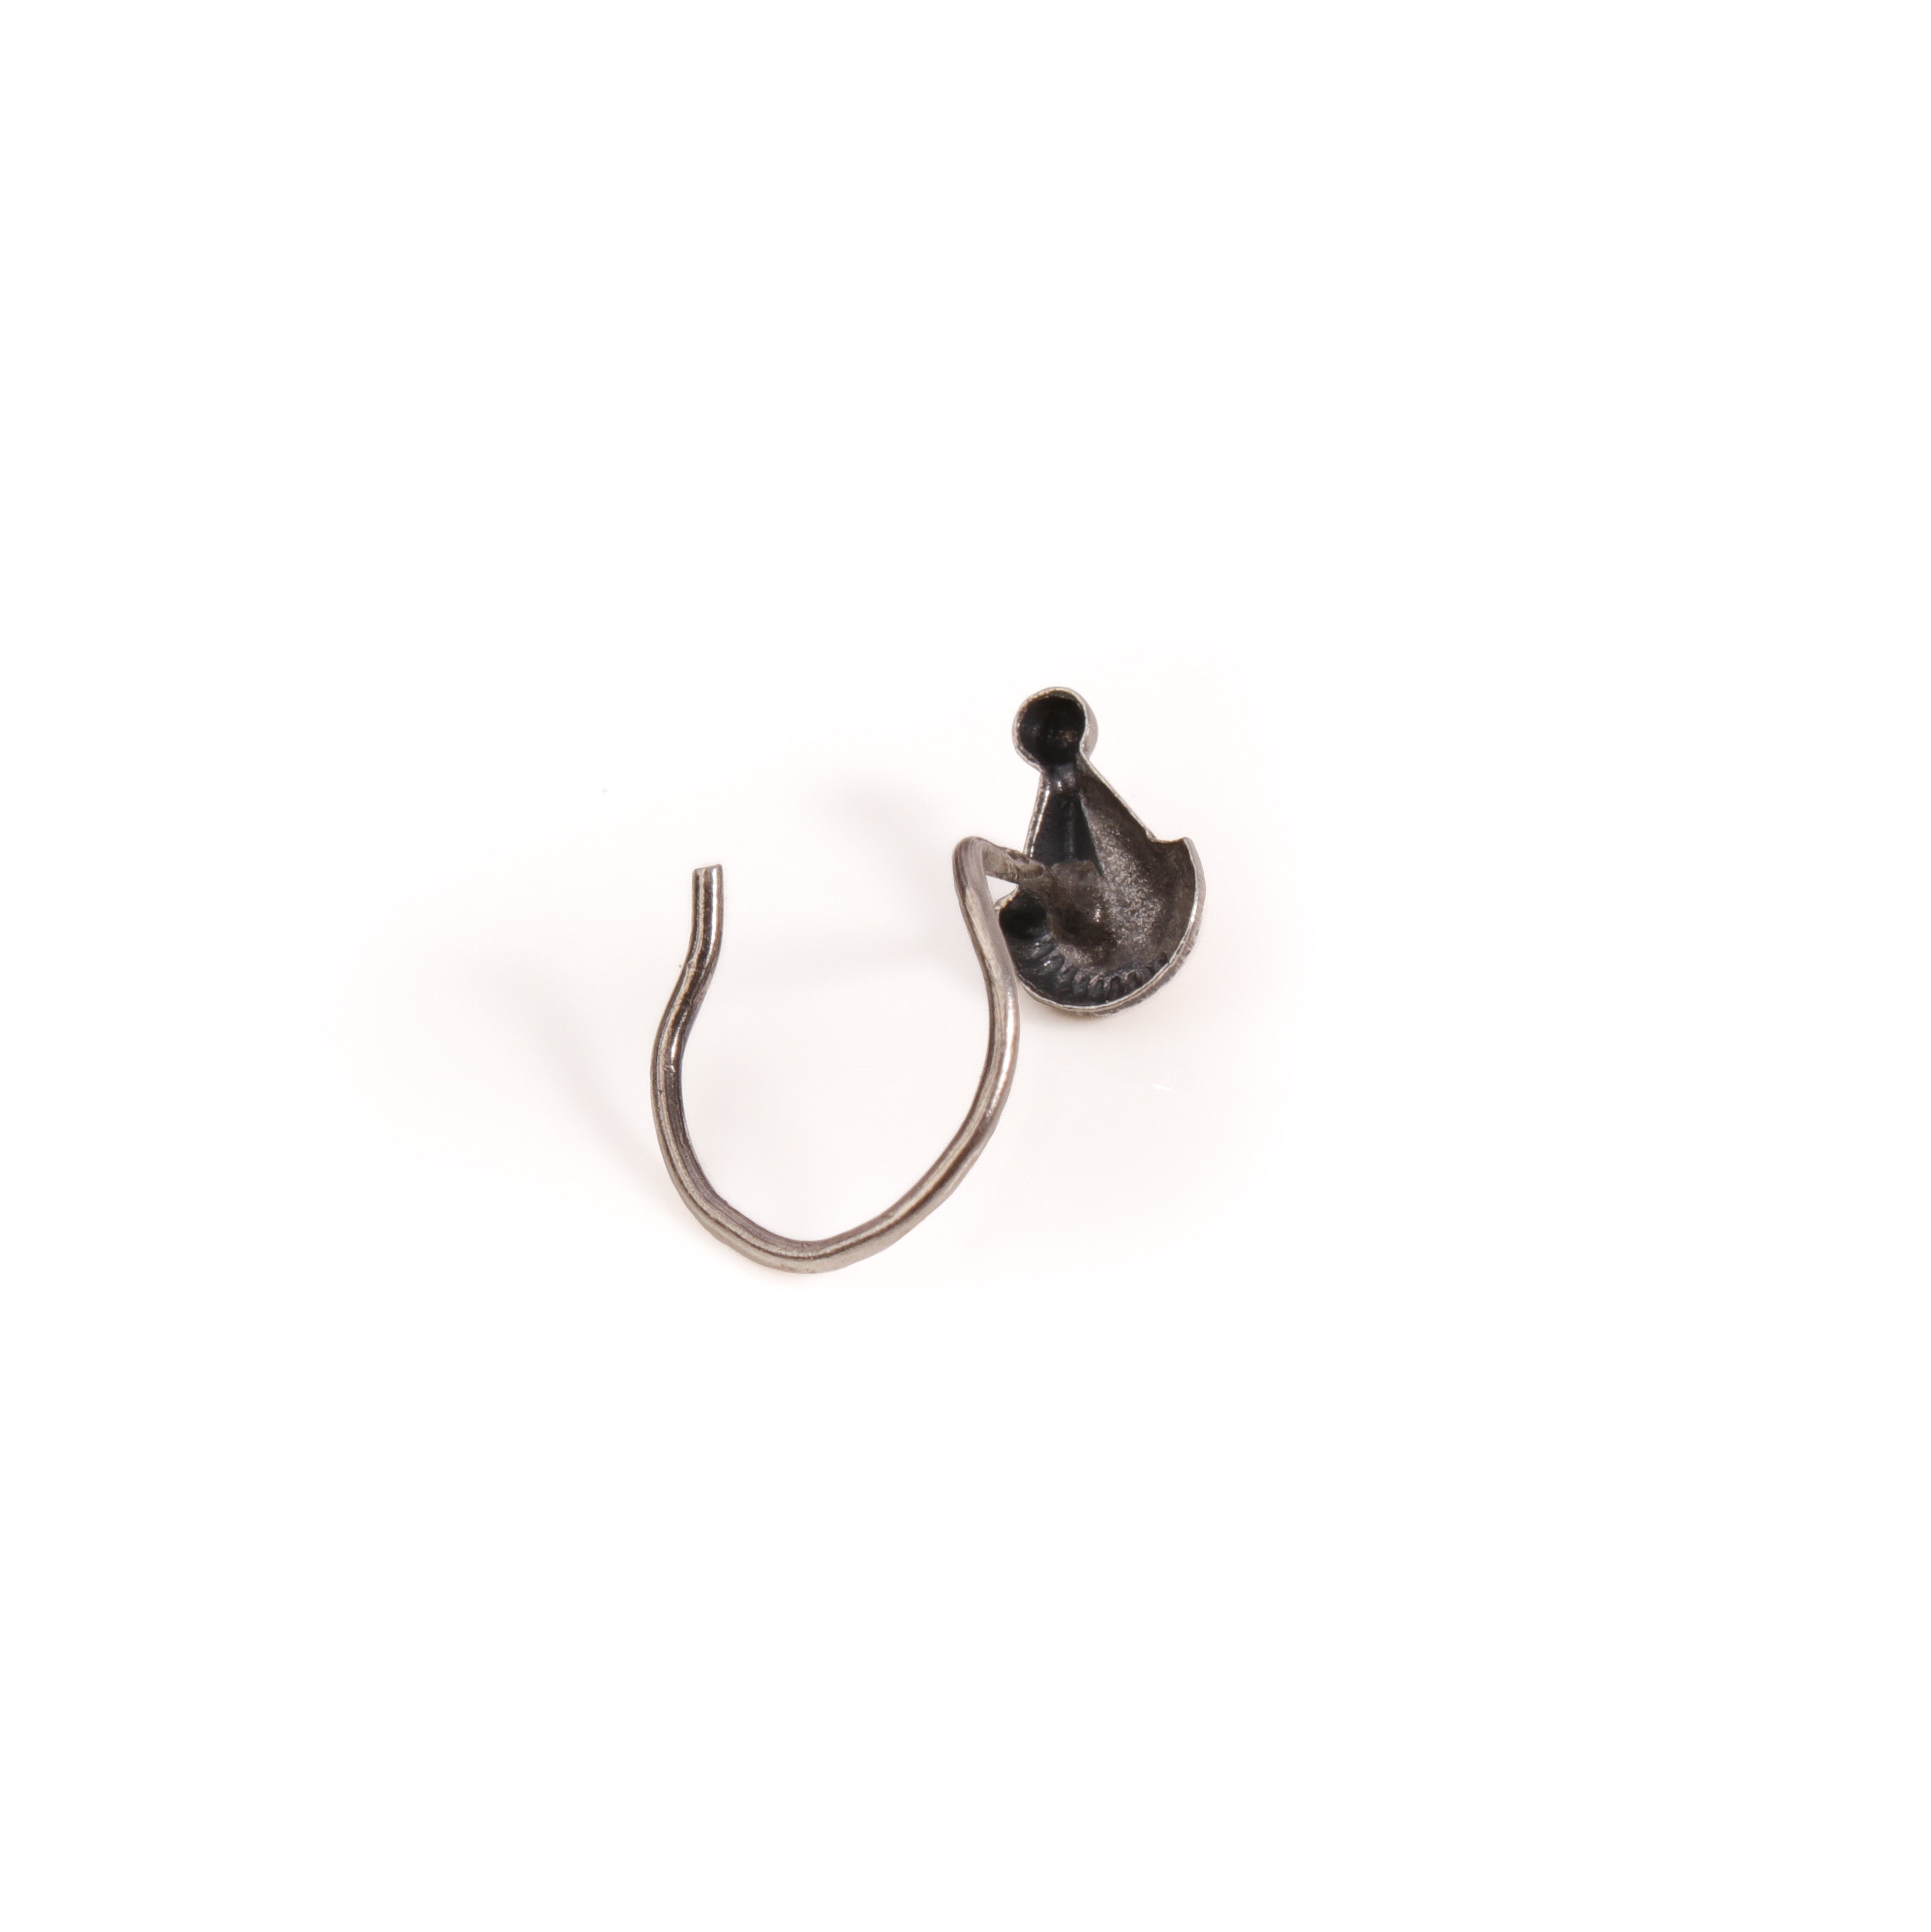 Parnika Nose pin, Pierced by MOHA